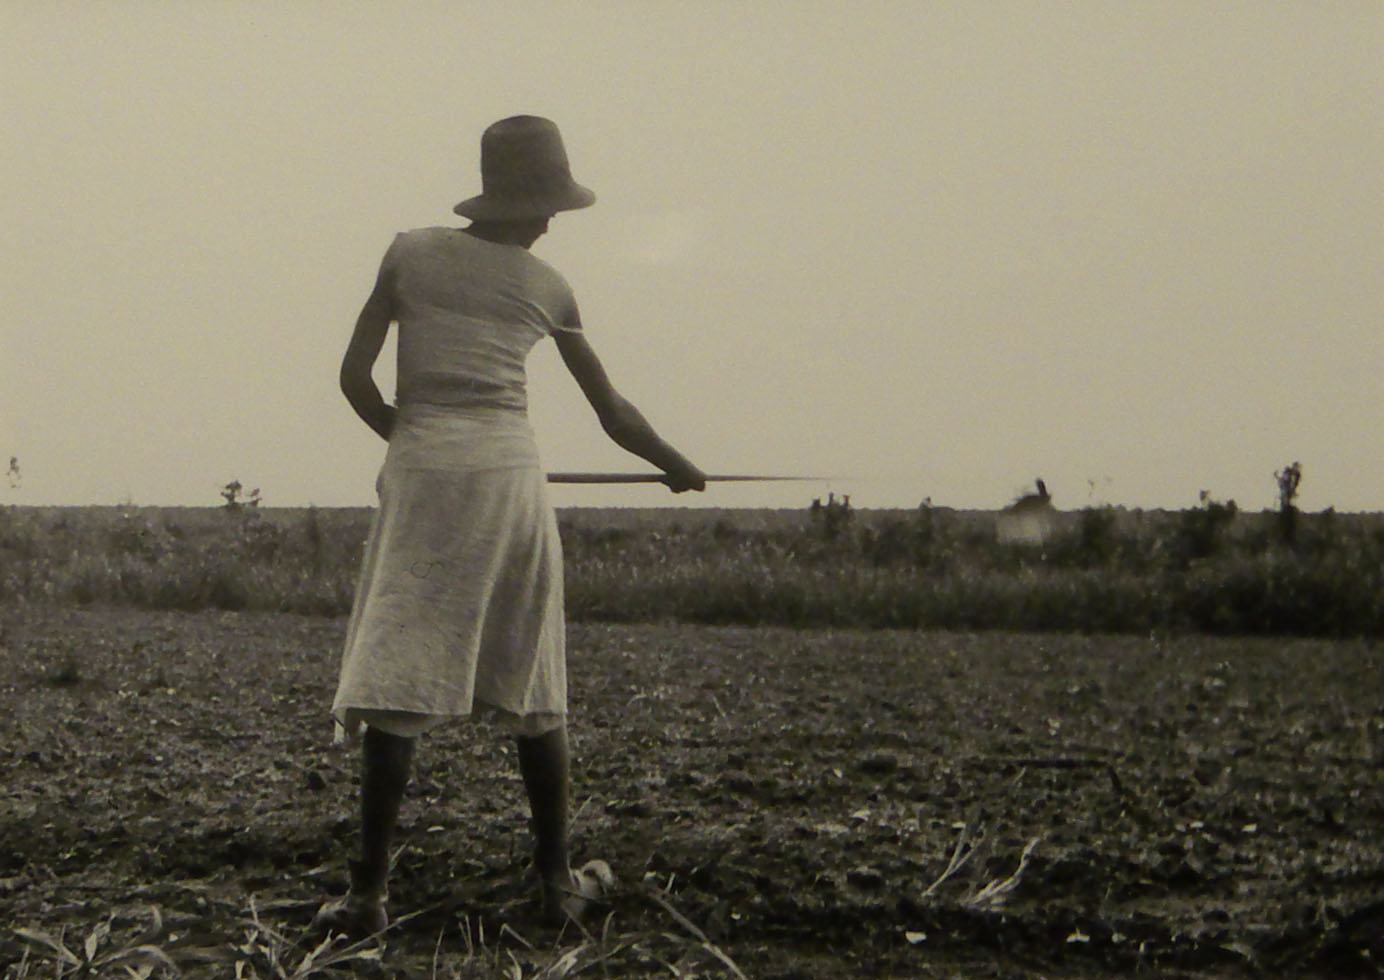 A woman in a dress wearing a hat holding a stick in a field.